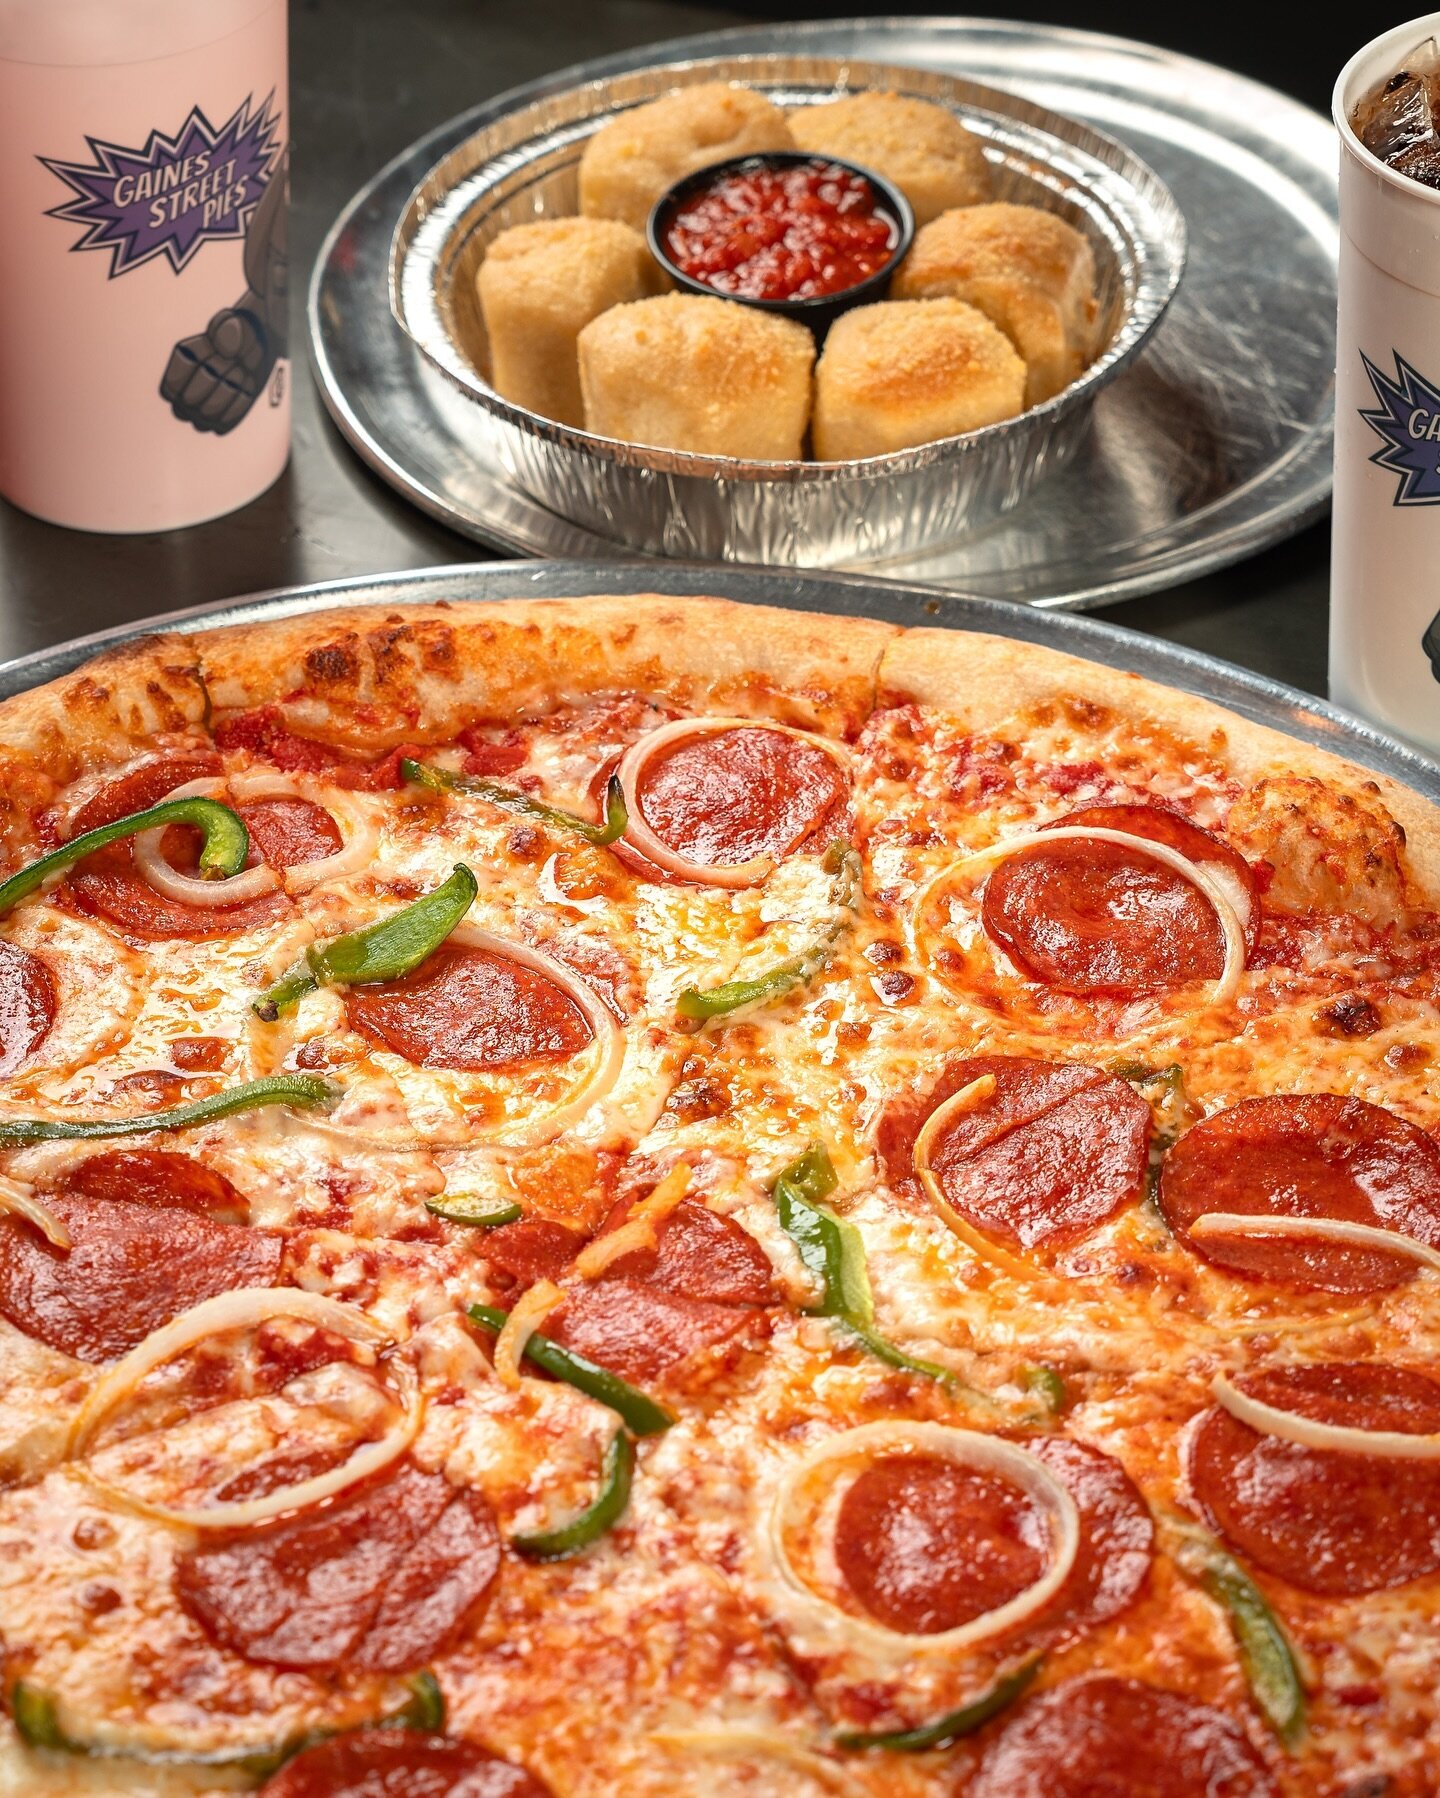 Don&rsquo;t feel like cooking? Let us make you dinner tonight 🍕 Order any large 3-topping pizza with an order of garlic knots for only $23. Available 7 days a week, this delicious deal is perfect to feed the whole family!